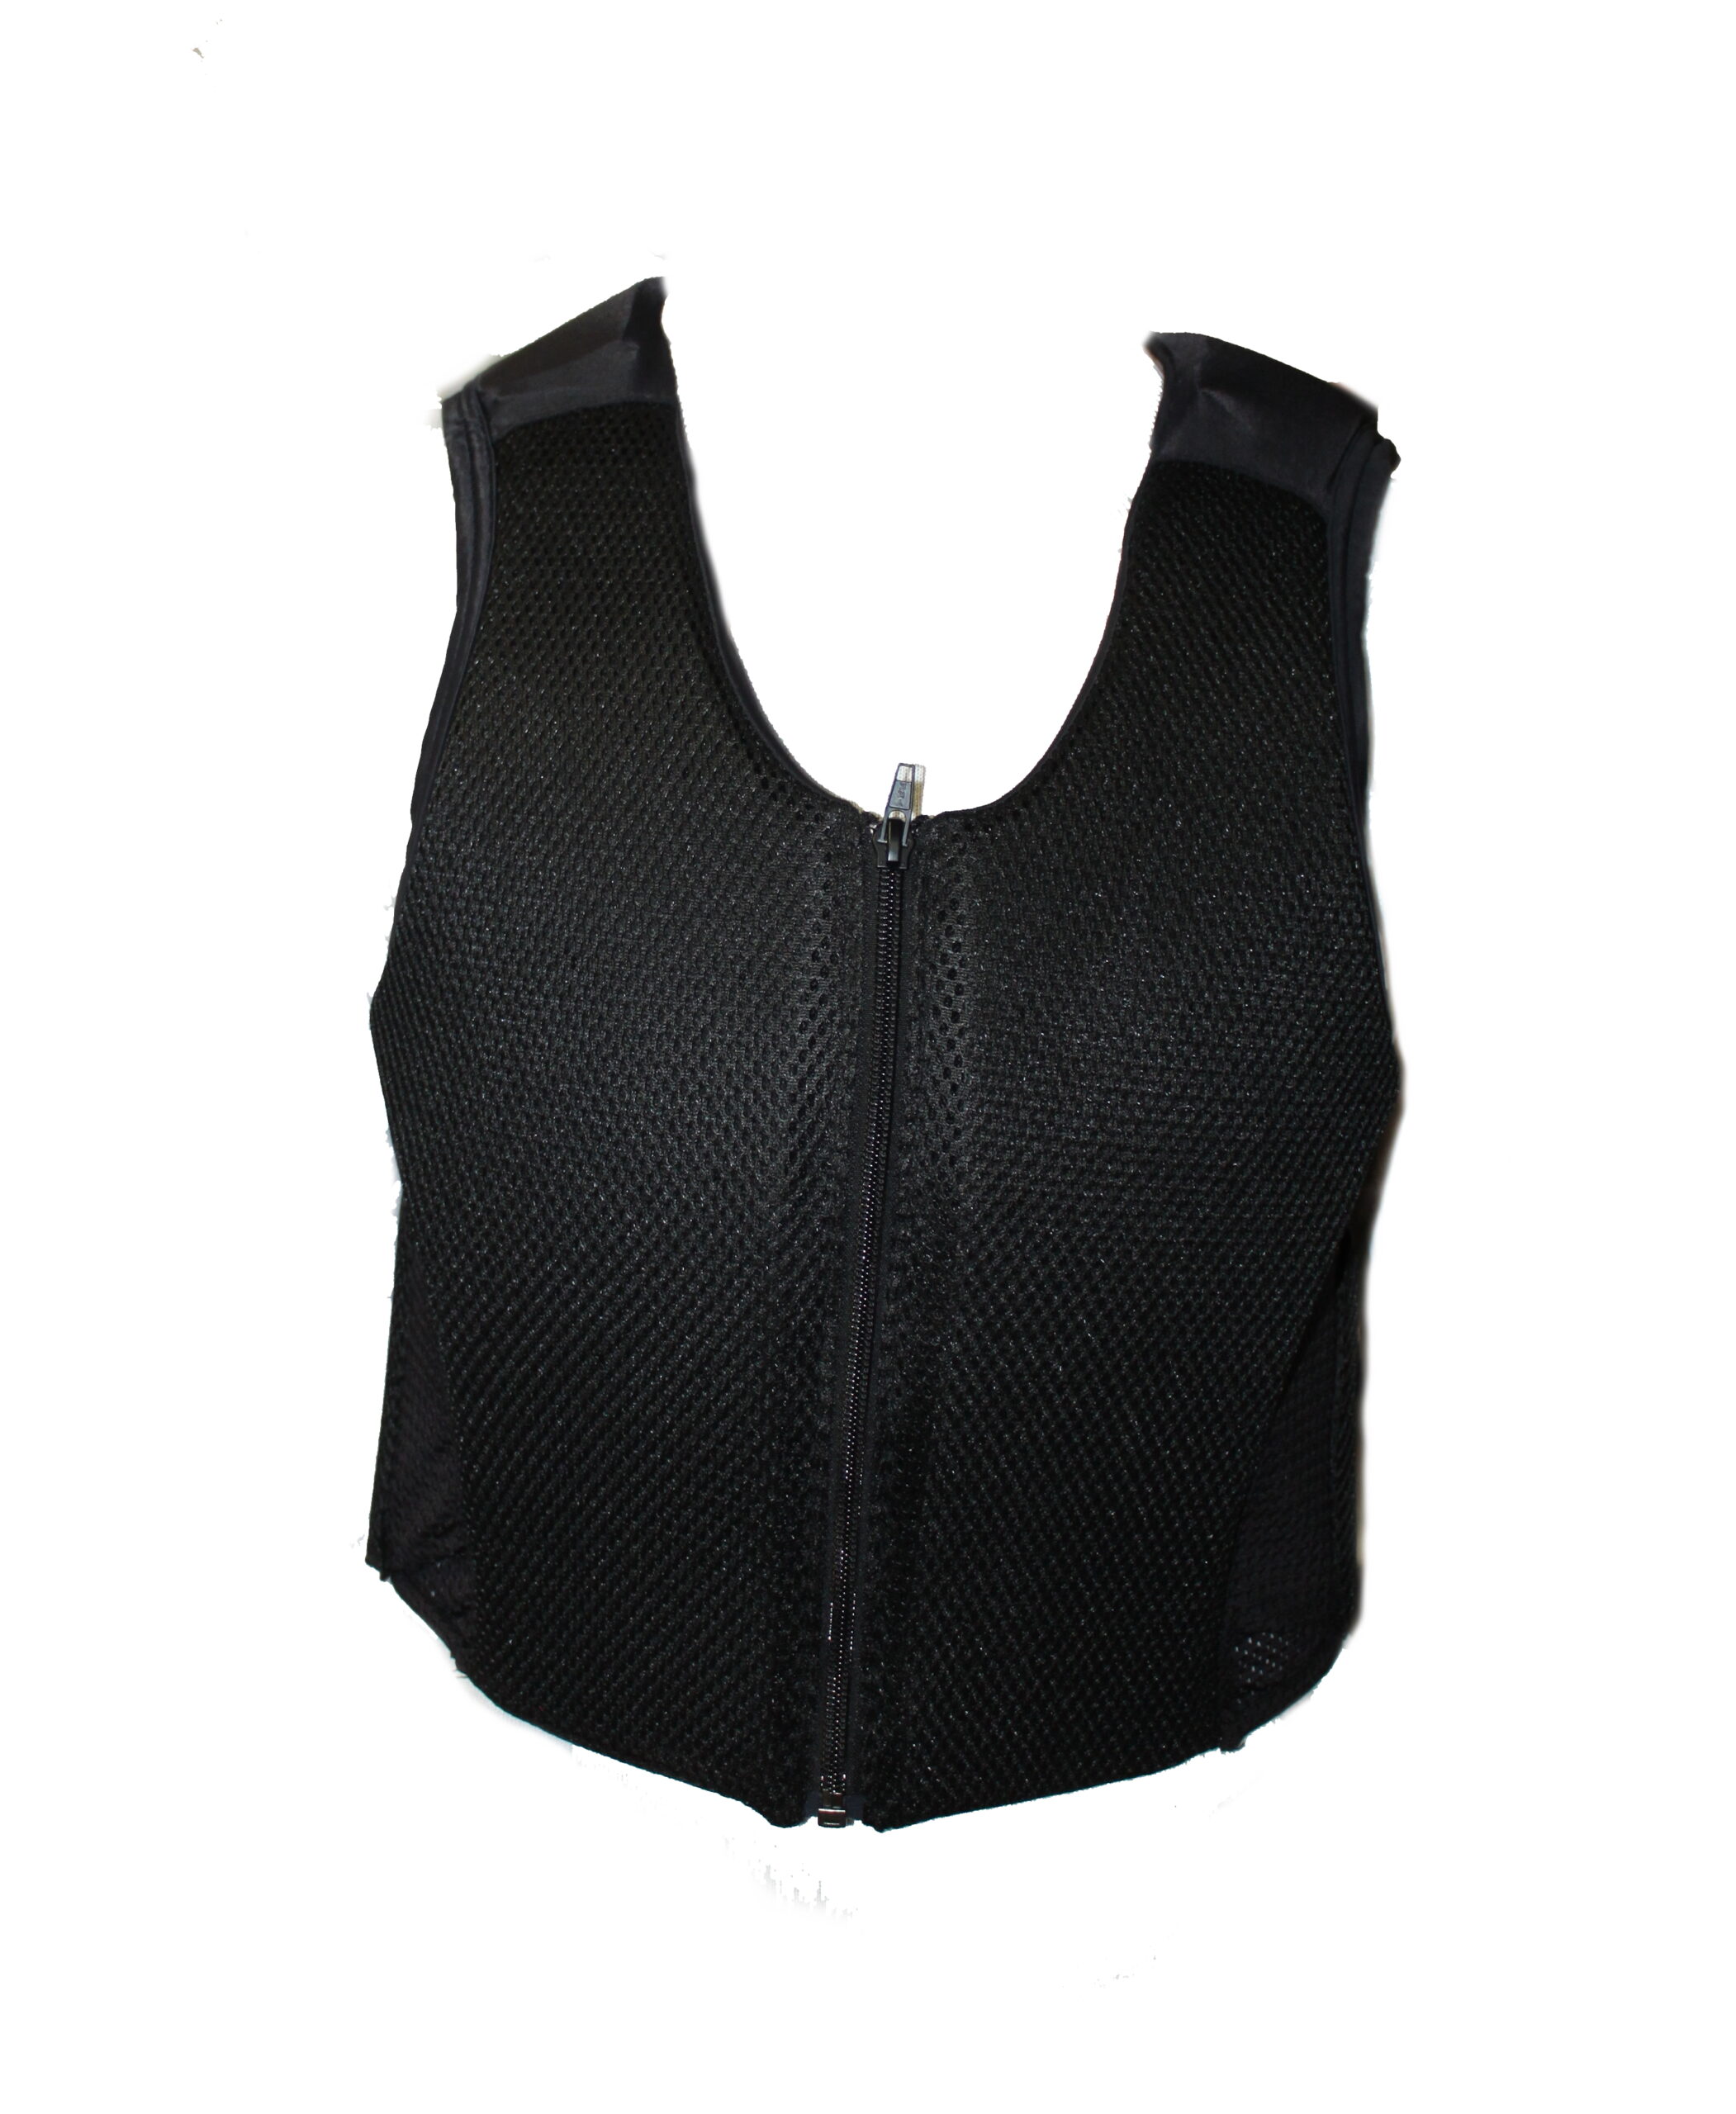 Racing Tack Pro Body Protector - Adult - Dave Wilson Equine SportsDave ...